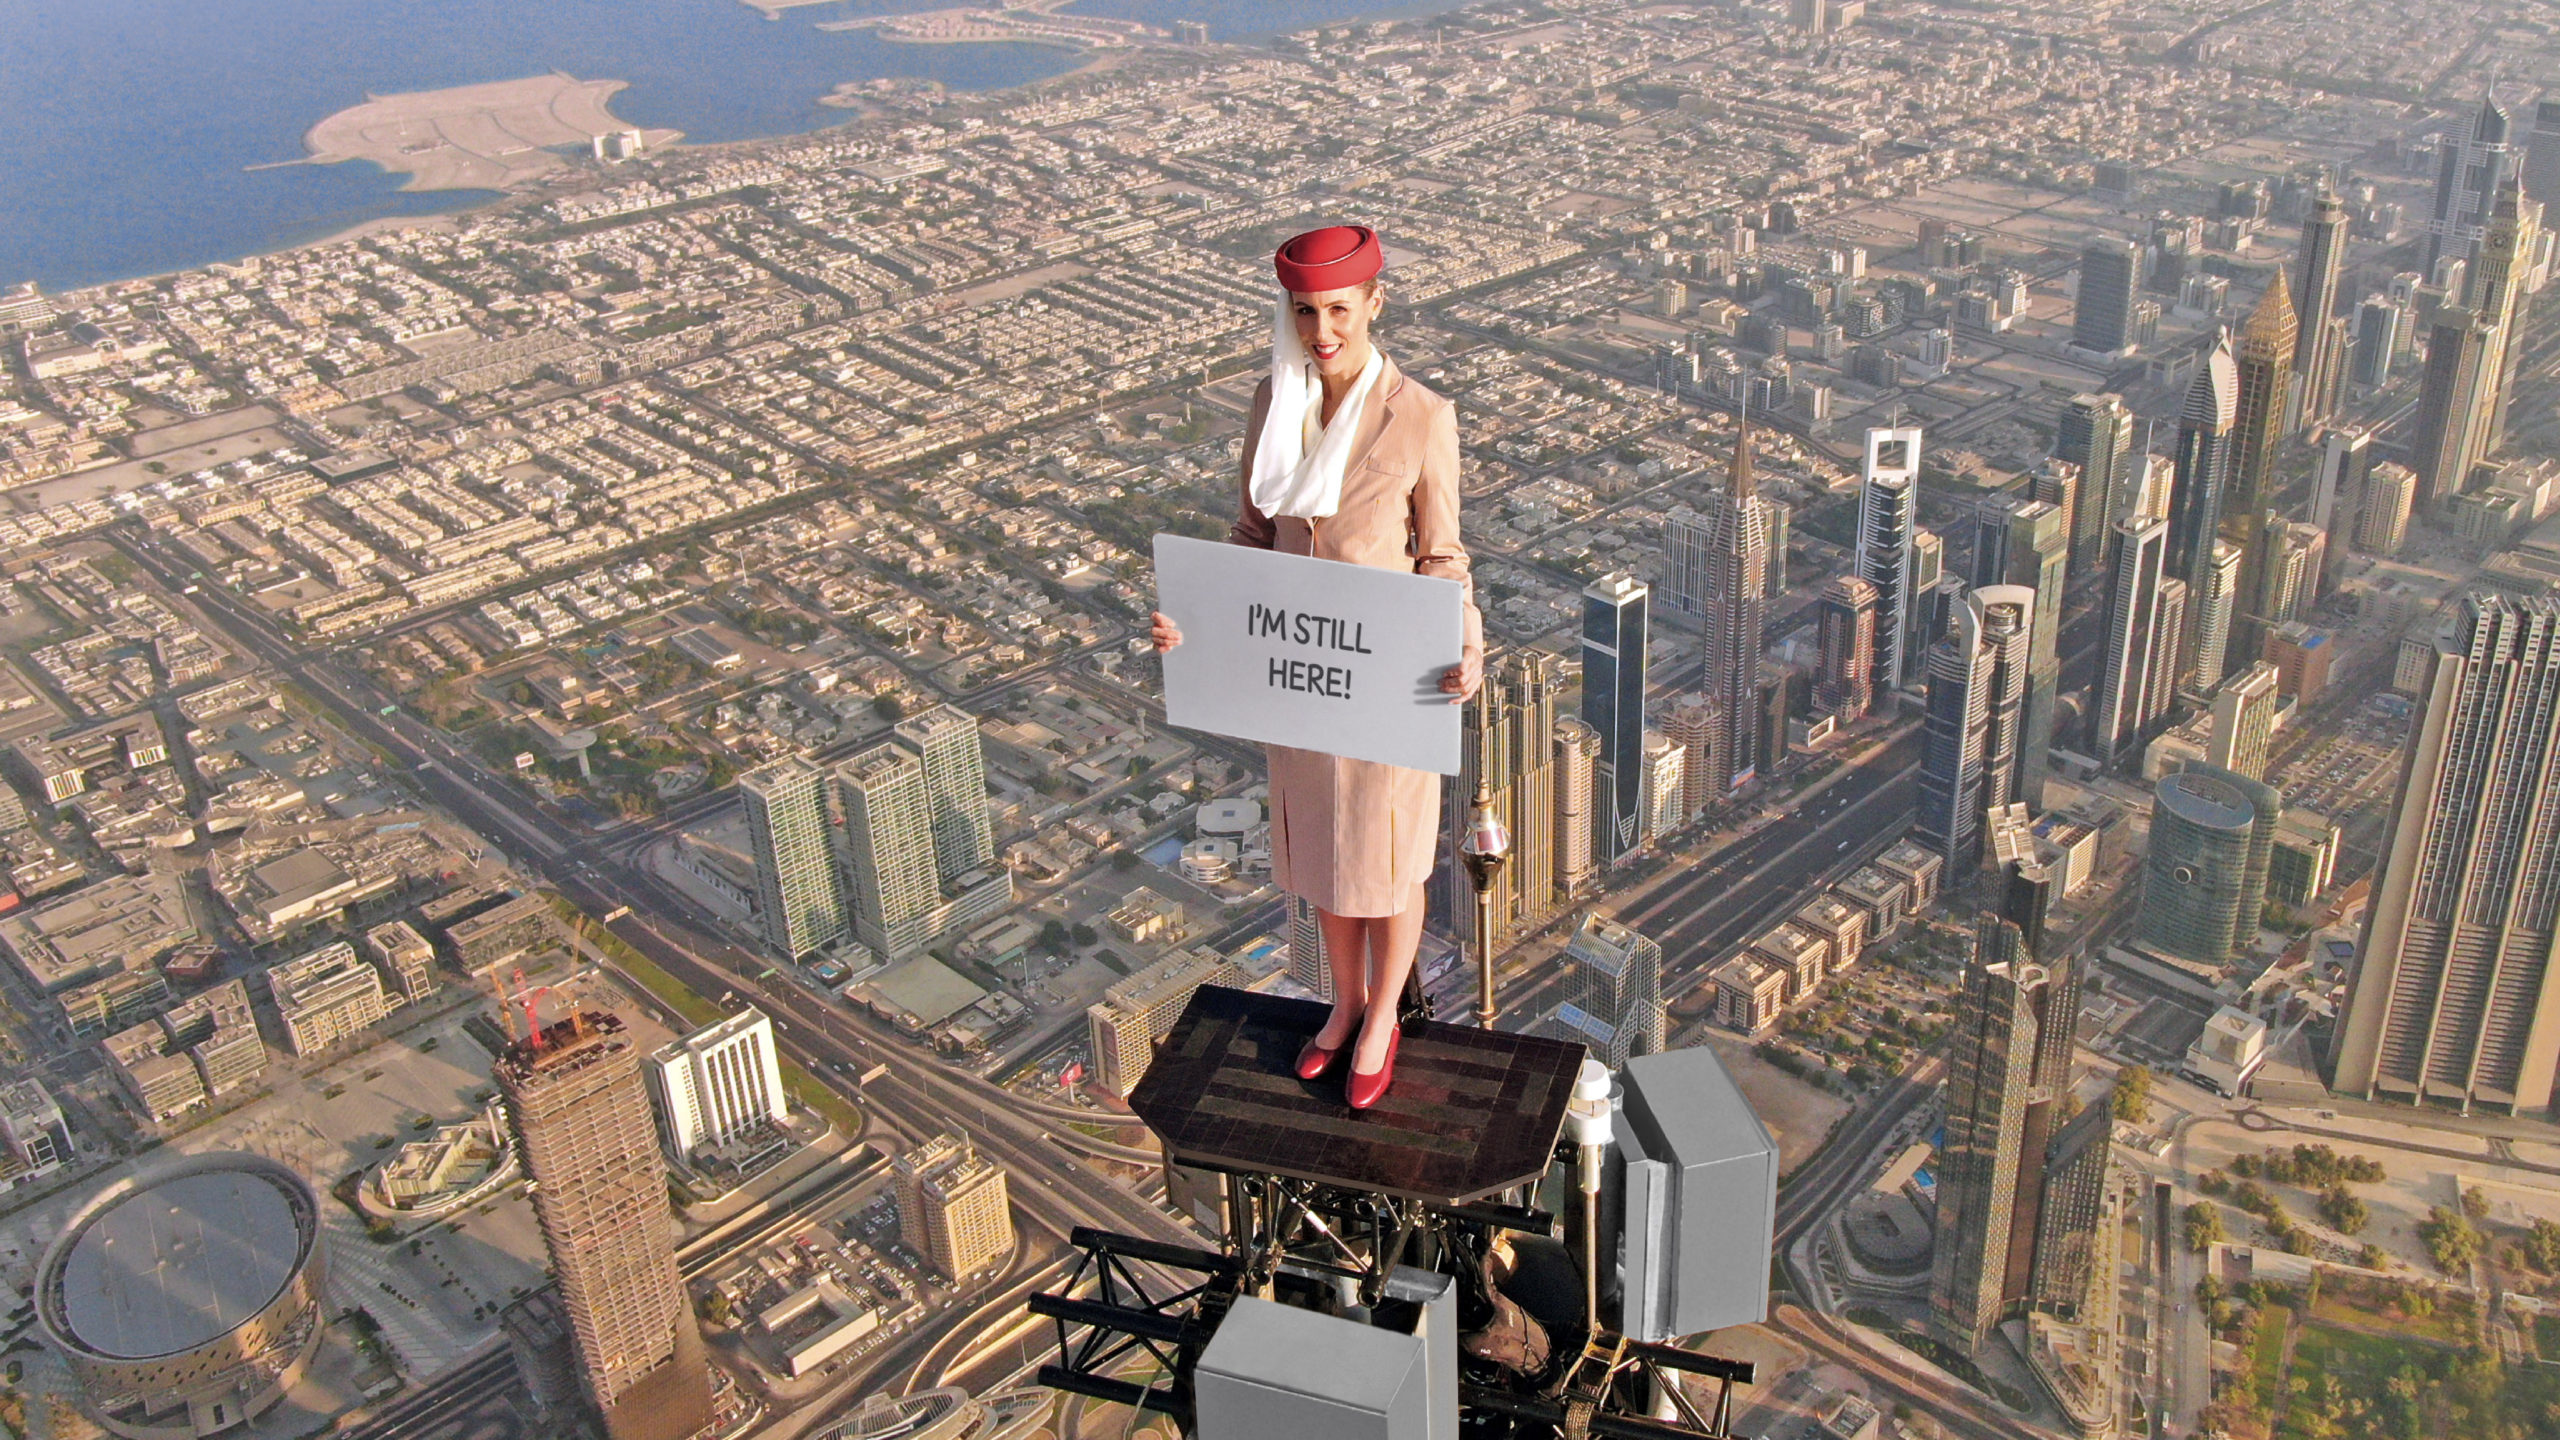 The brave stuntwoman is standing at the pinnacle of the Burj Khalifa by Emaar once again, holding up message boards with an invitation to visit the world’s greatest show, Expo 2020 Dubai, on the iconic Emirates A380.